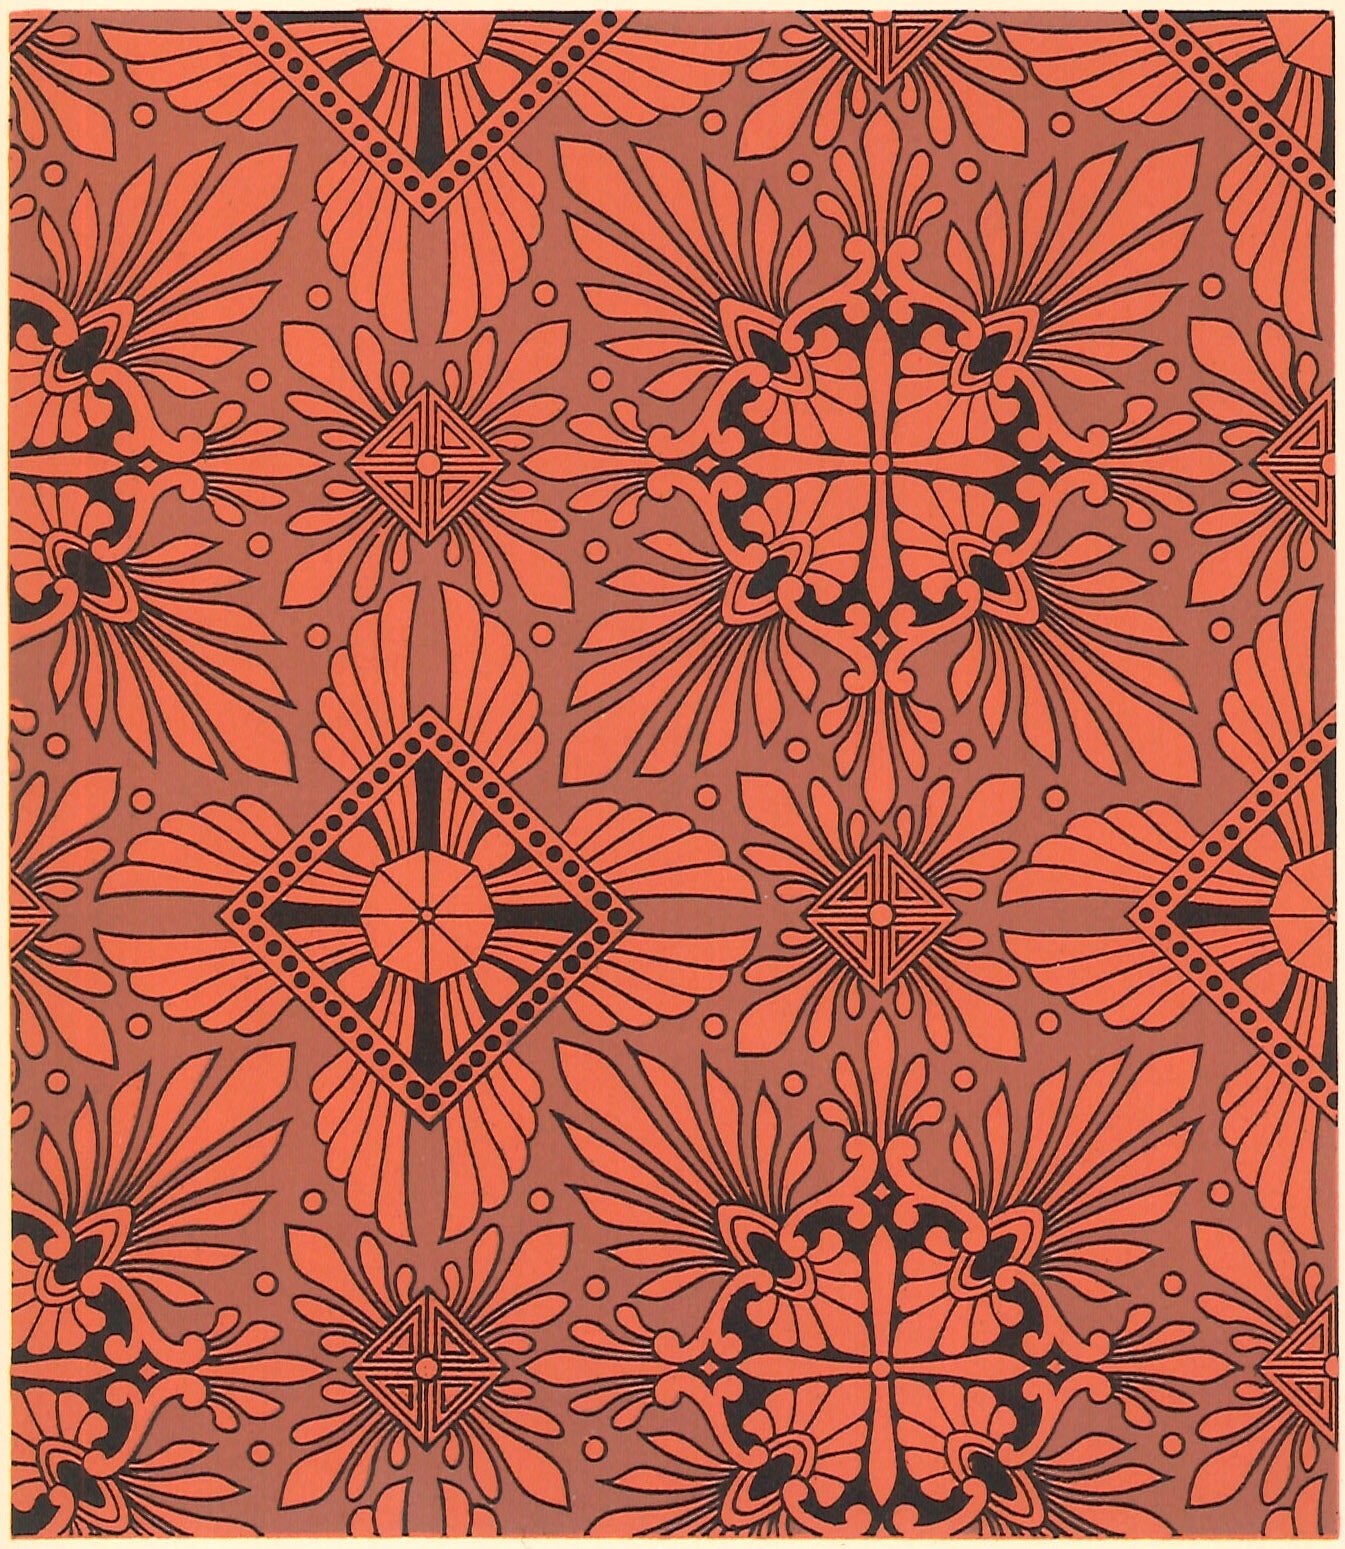 Source image for this floorcloth's design; based on a pattern in Christopher Dresser's "Studies in Design", c. 1875.